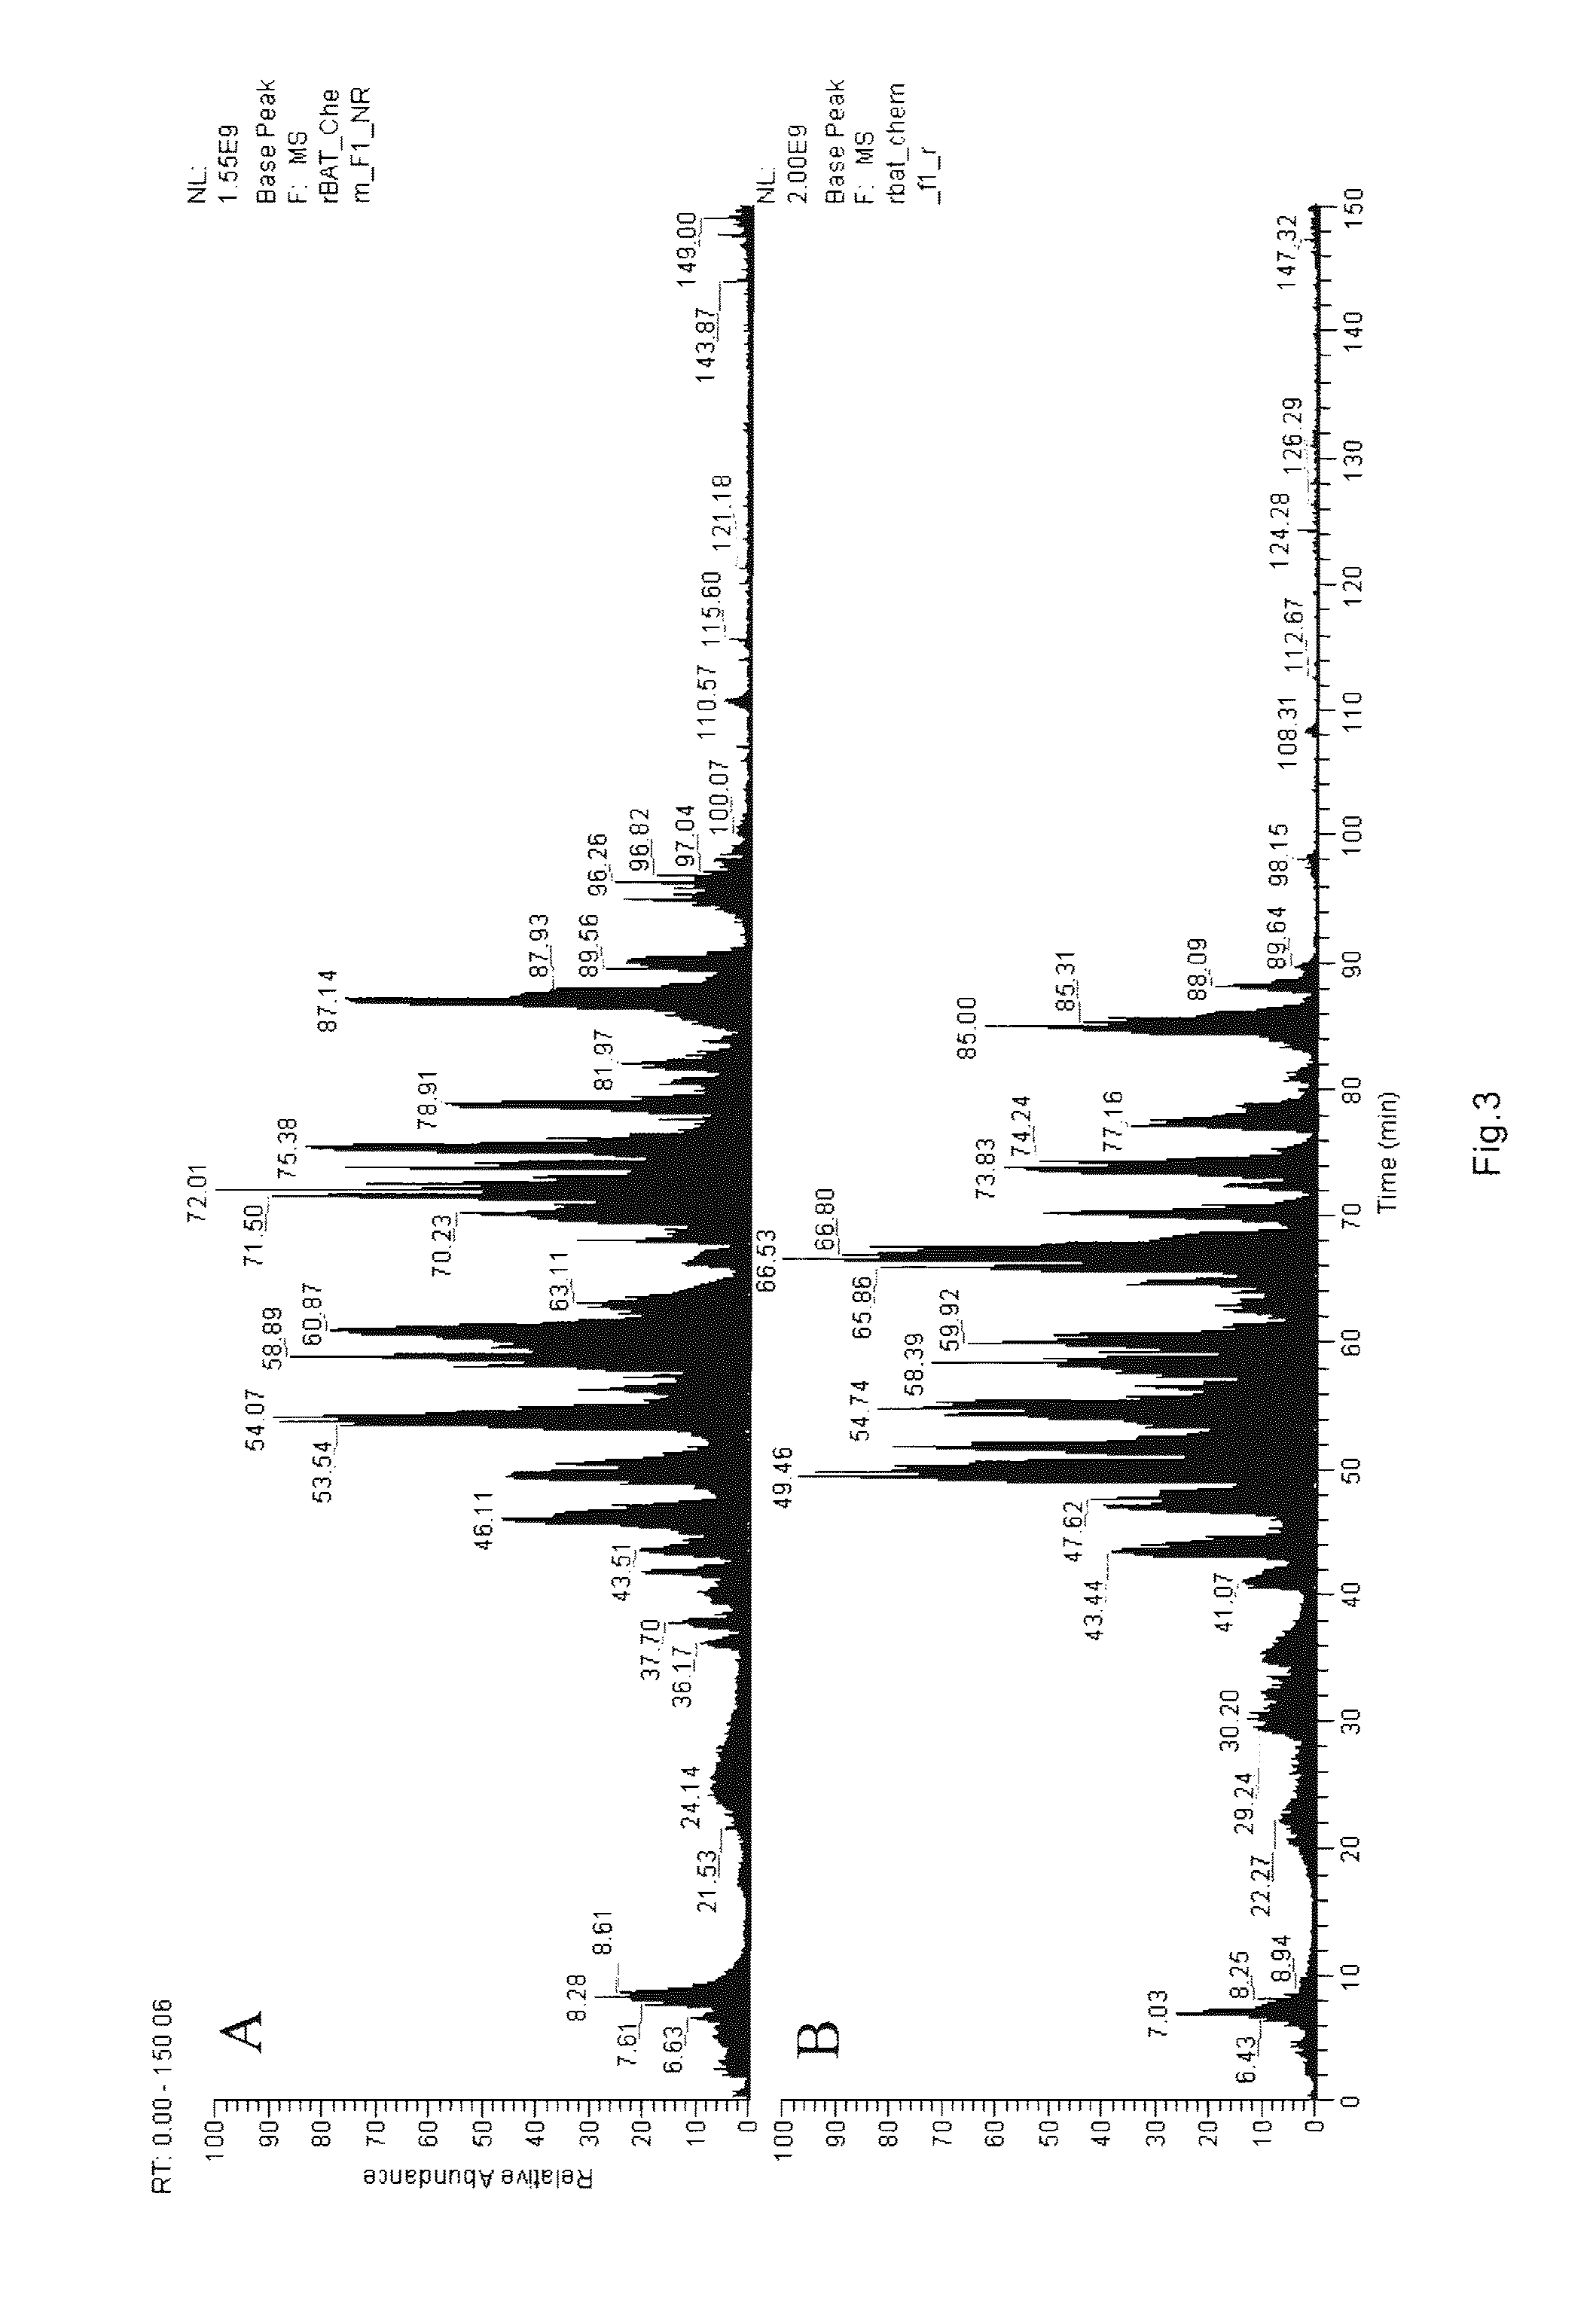 Purified recombinant batroxobin with high specific activity